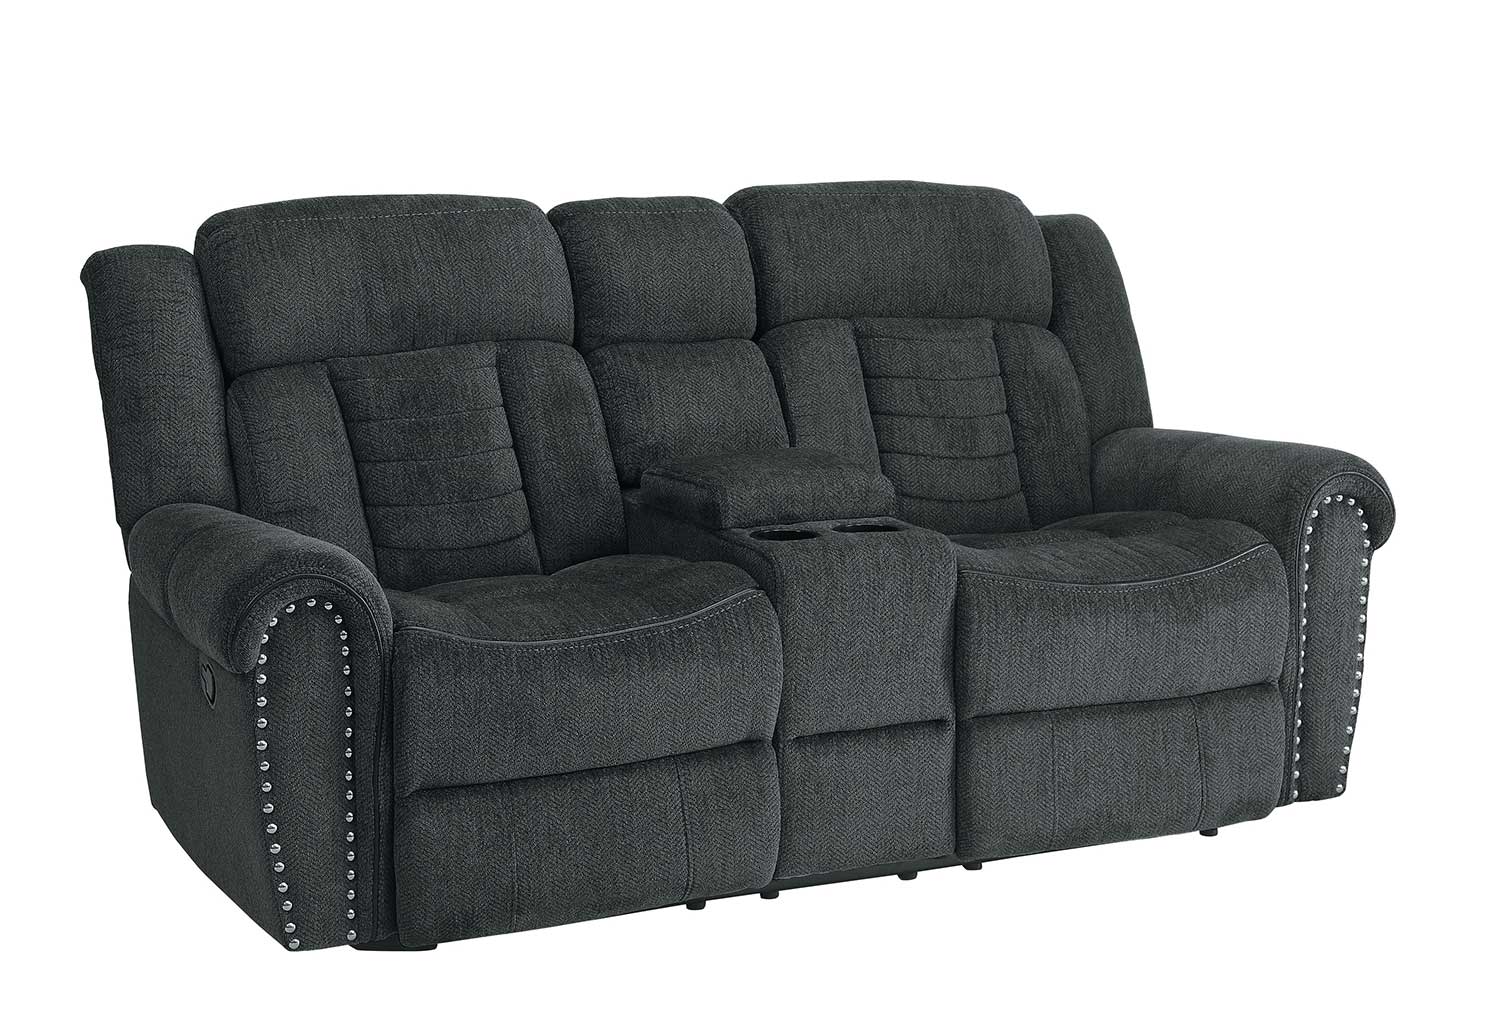 Homelegance Nutmeg Double Reclining Love Seat With Center Console - Charcoal Gray